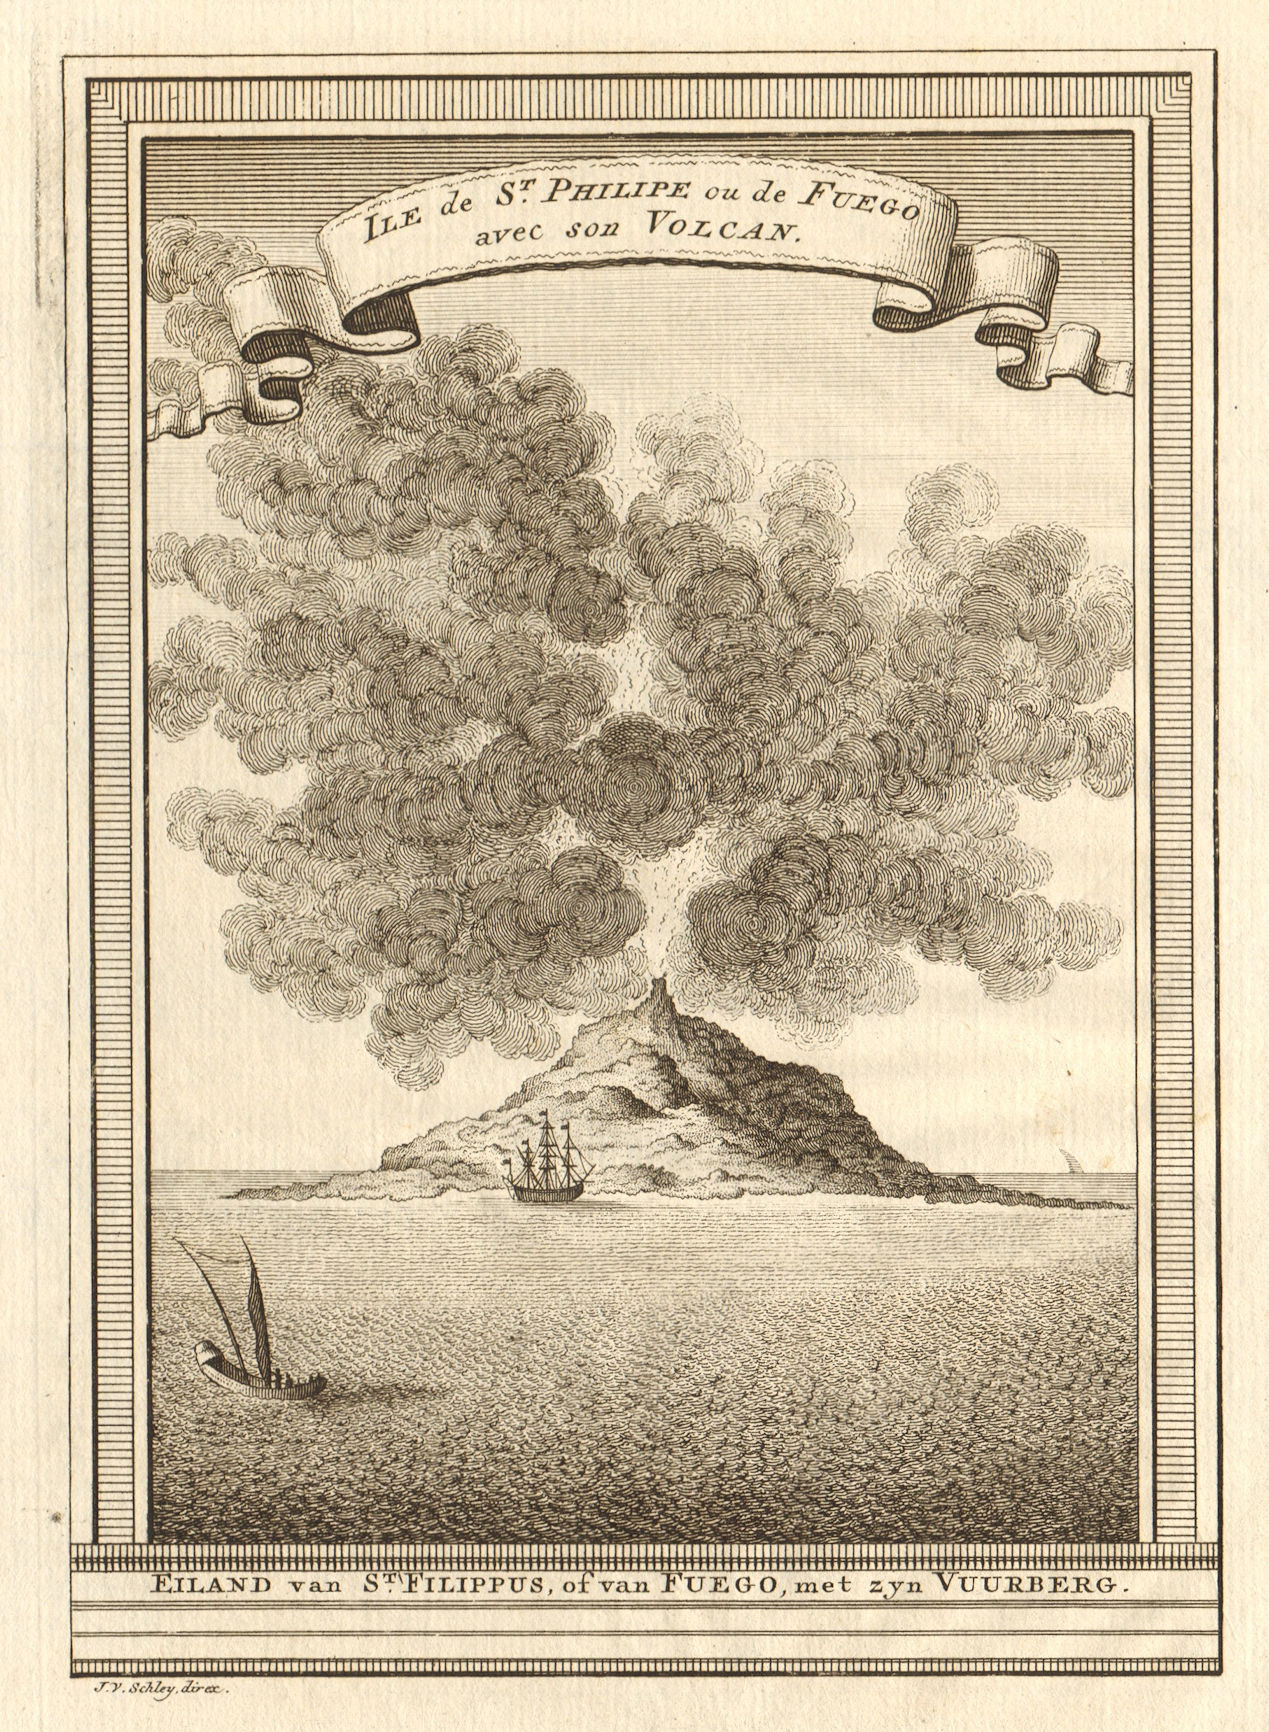 Cape Verde islands. Isle of St. Philippe or Fogo with its volcano. SCHLEY 1747